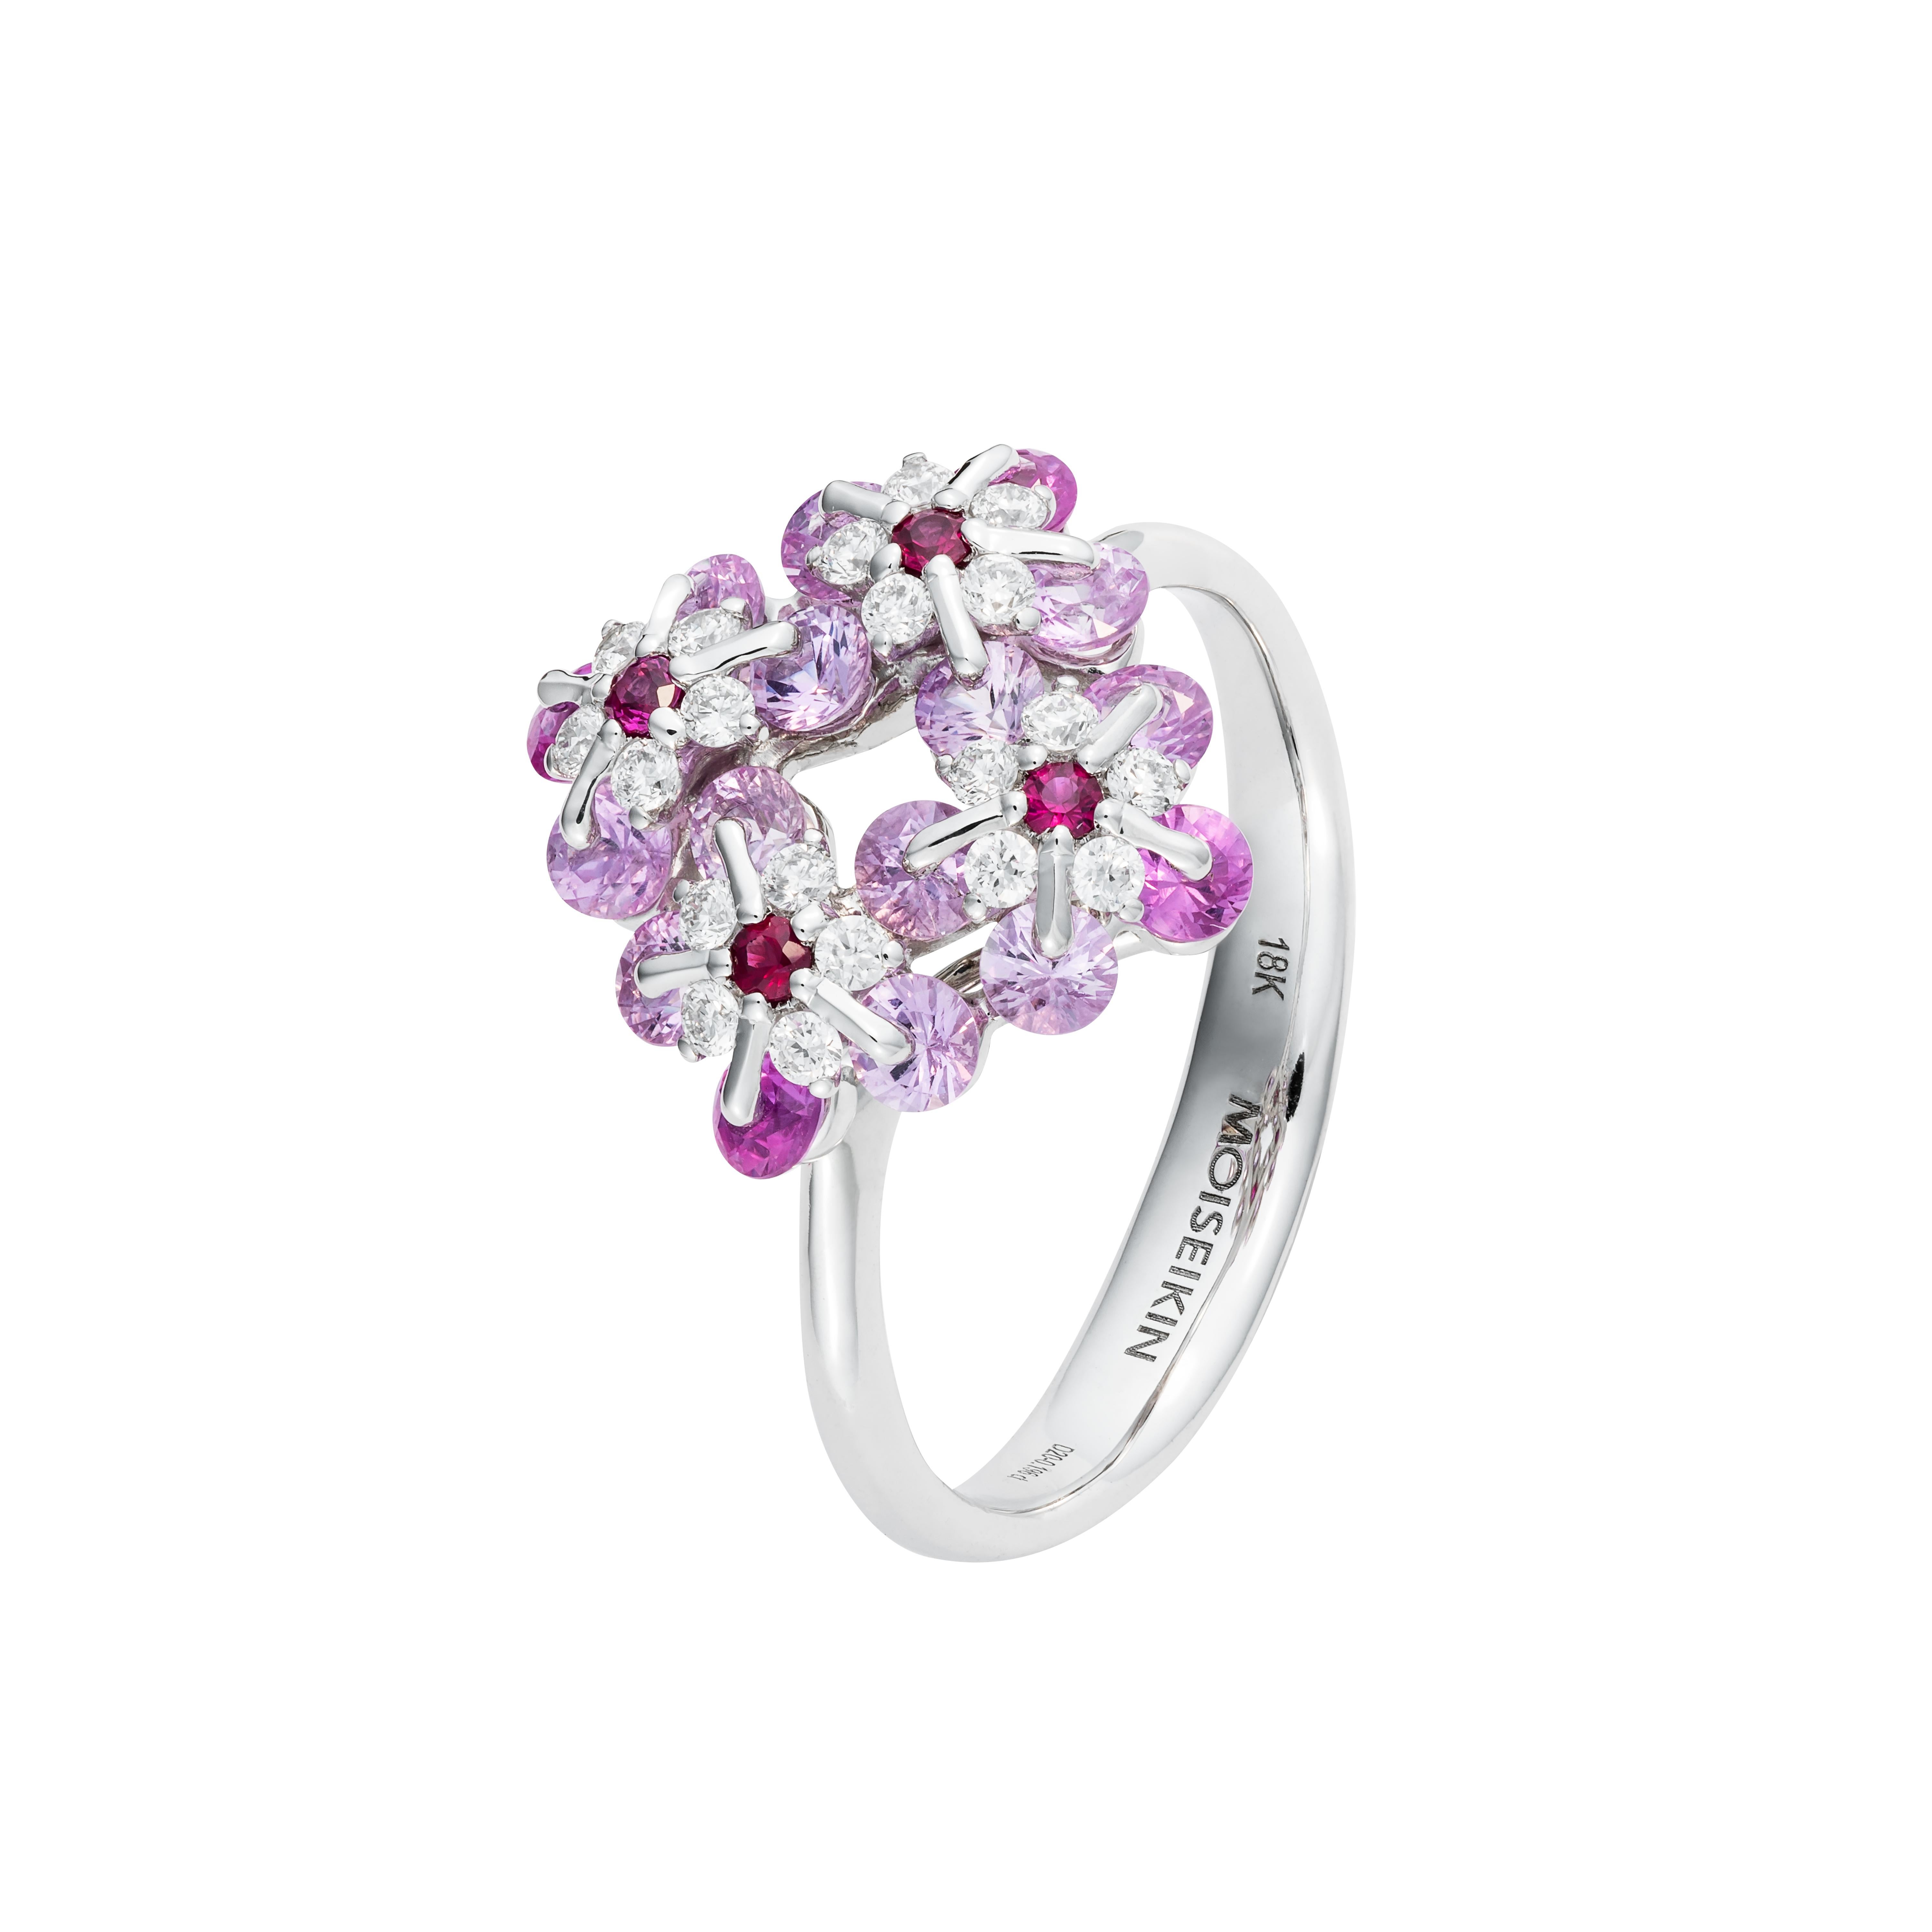 Symbol of remembrance and eternal love, Forget-Me-Not flower has become an everlasting flower. Made in 18karat white gold, diamonds and 1.192ct vivid pink sapphires are uniquely set using the Waltzing Brilliance technology. This lively ring will be